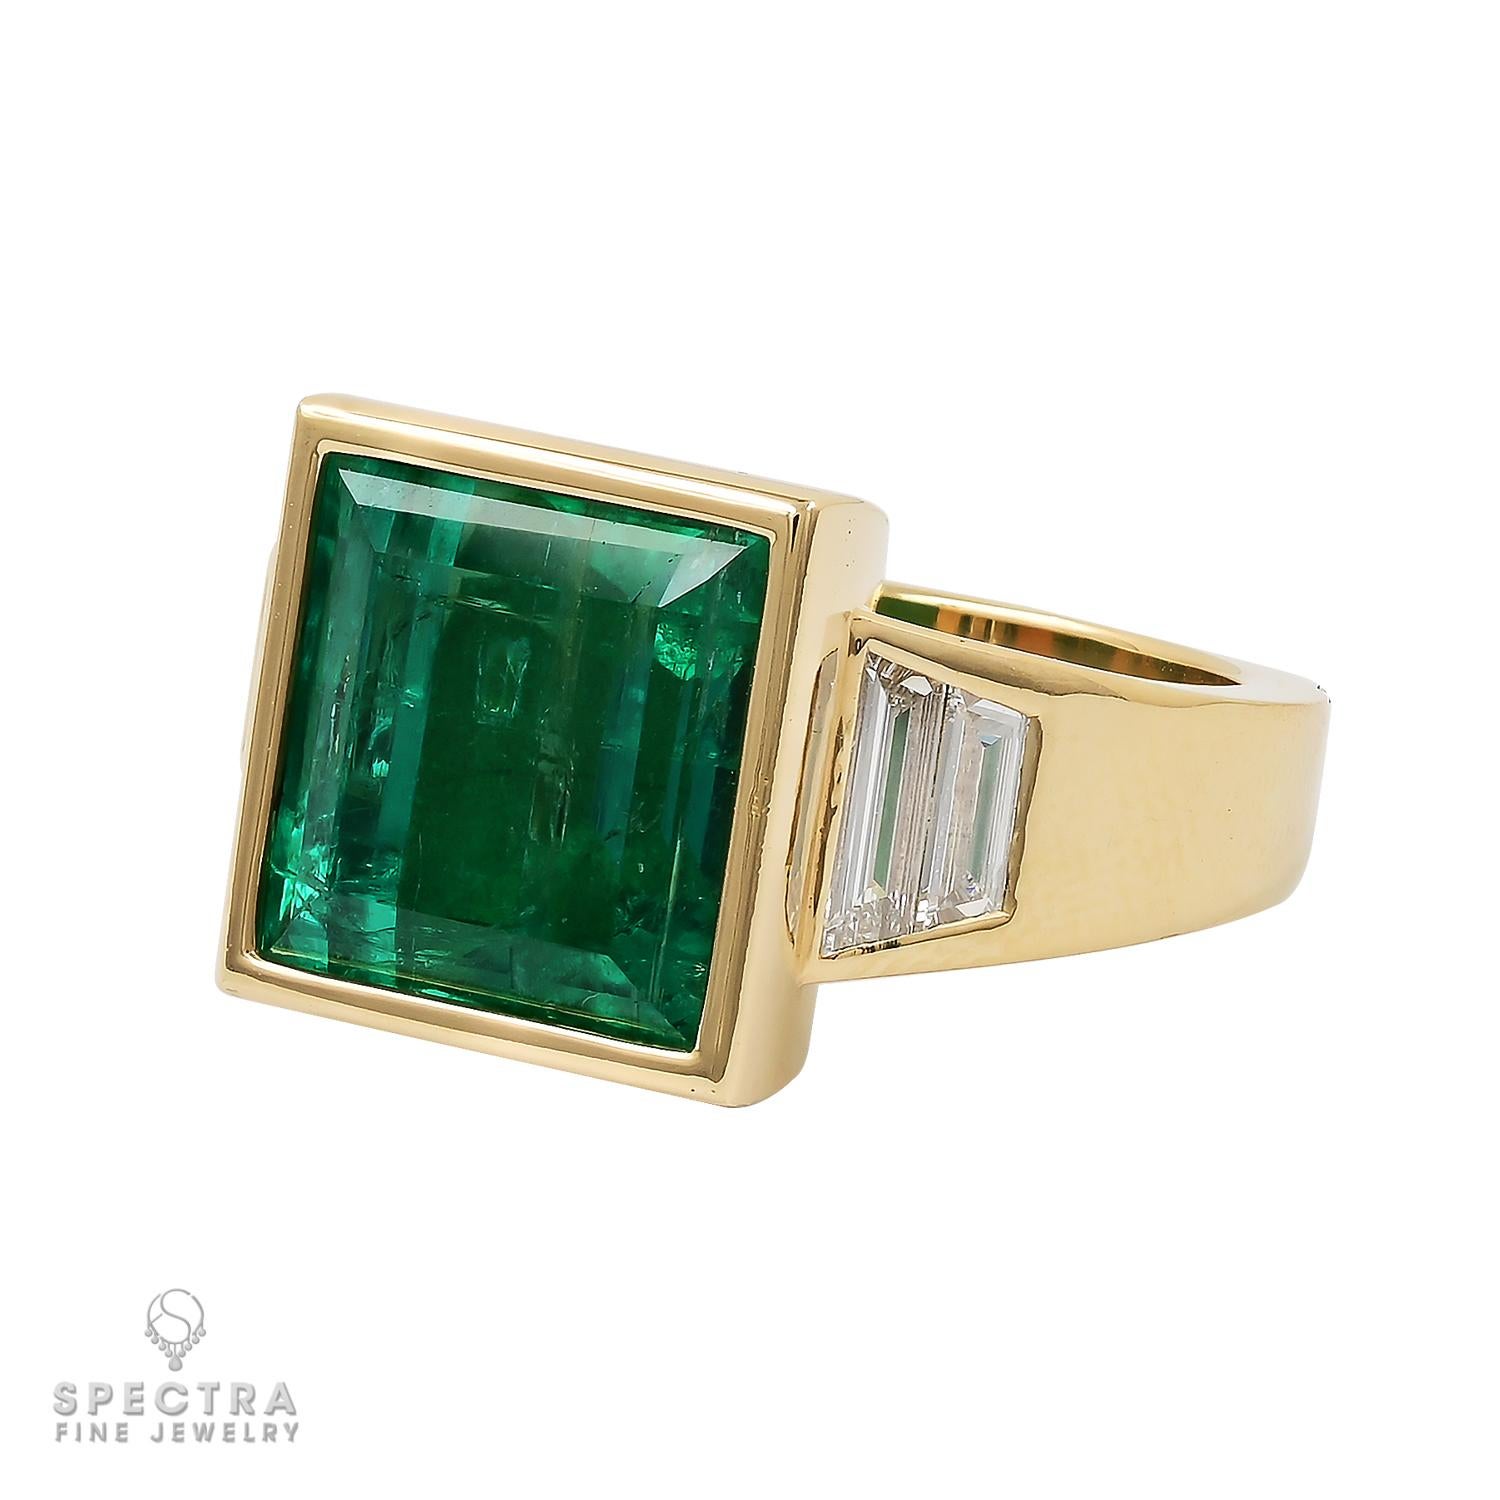 Step into the captivating world of this Contemporary Colombian Emerald Cocktail Ring made by Spectra Fine Jewelry. 

At the heart of this enchanting creation lies a 6.77 carat emerald-cut Colombian emerald, a gem of unrivaled prestige. Certified by